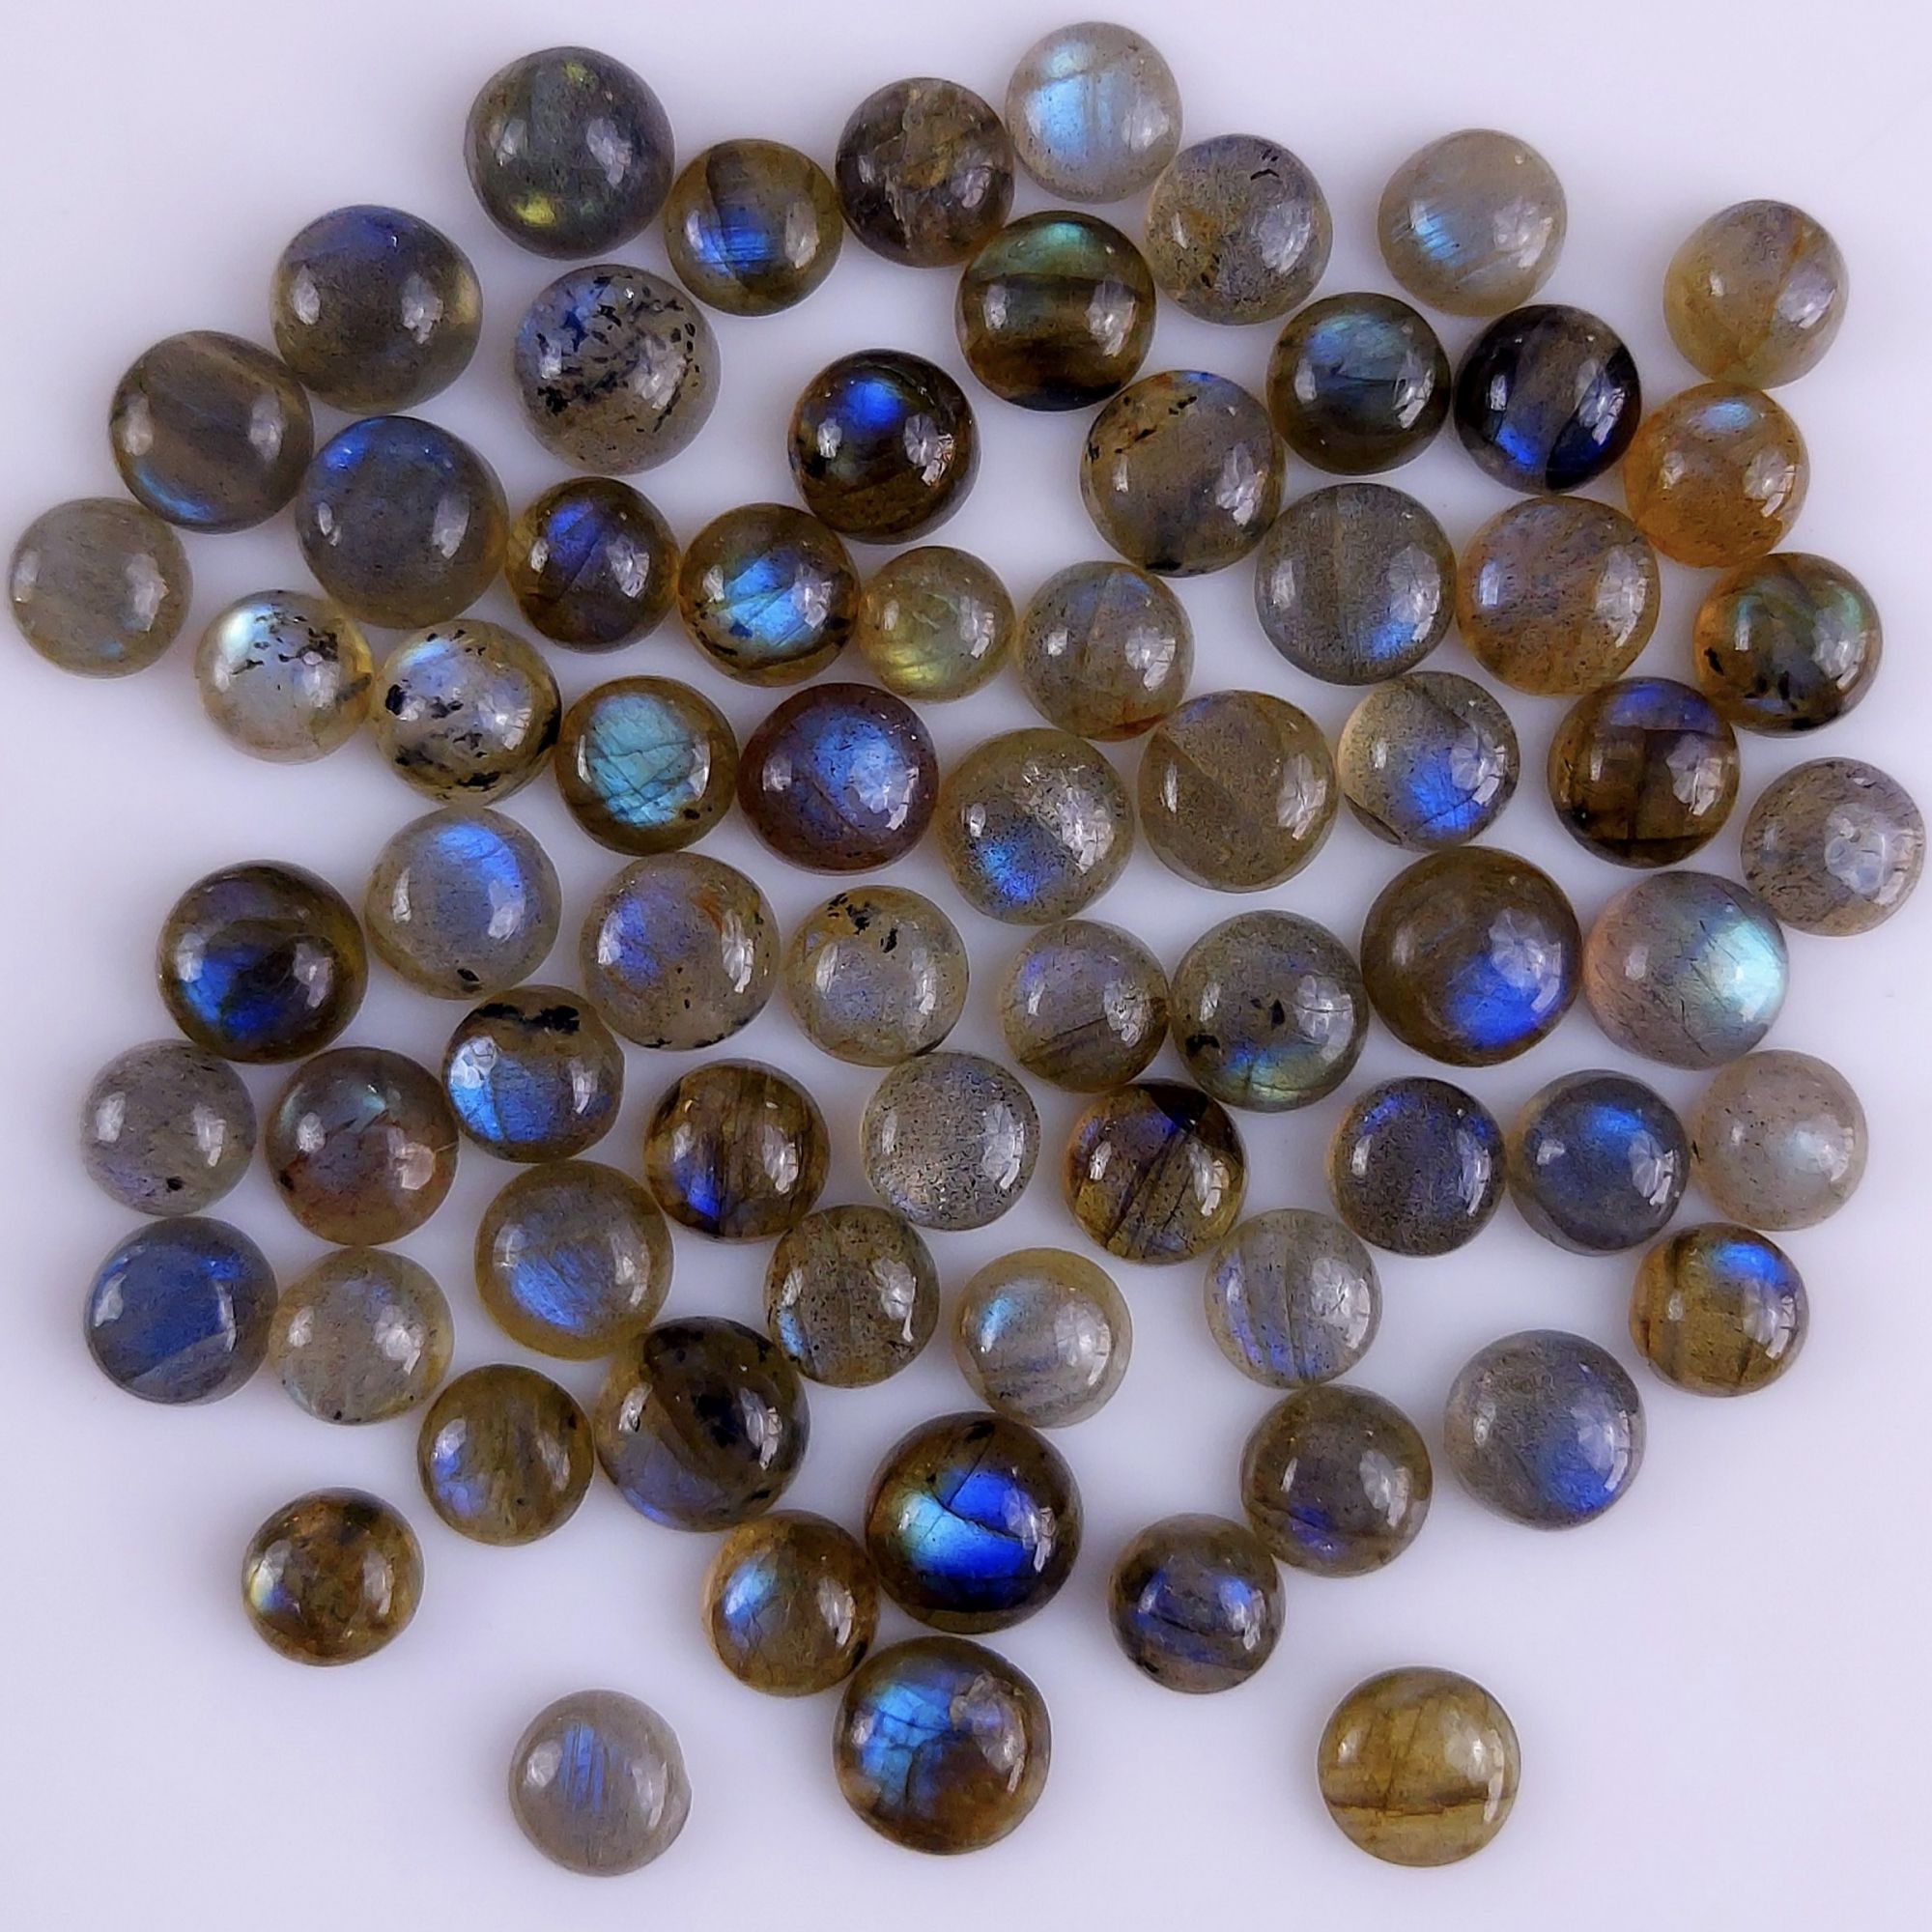 69Pcs 172Cts Natural Blue Labradorite Calibrated Cabochon Round Shape Gemstone Lot For Jewelry Making 5x5mm#740